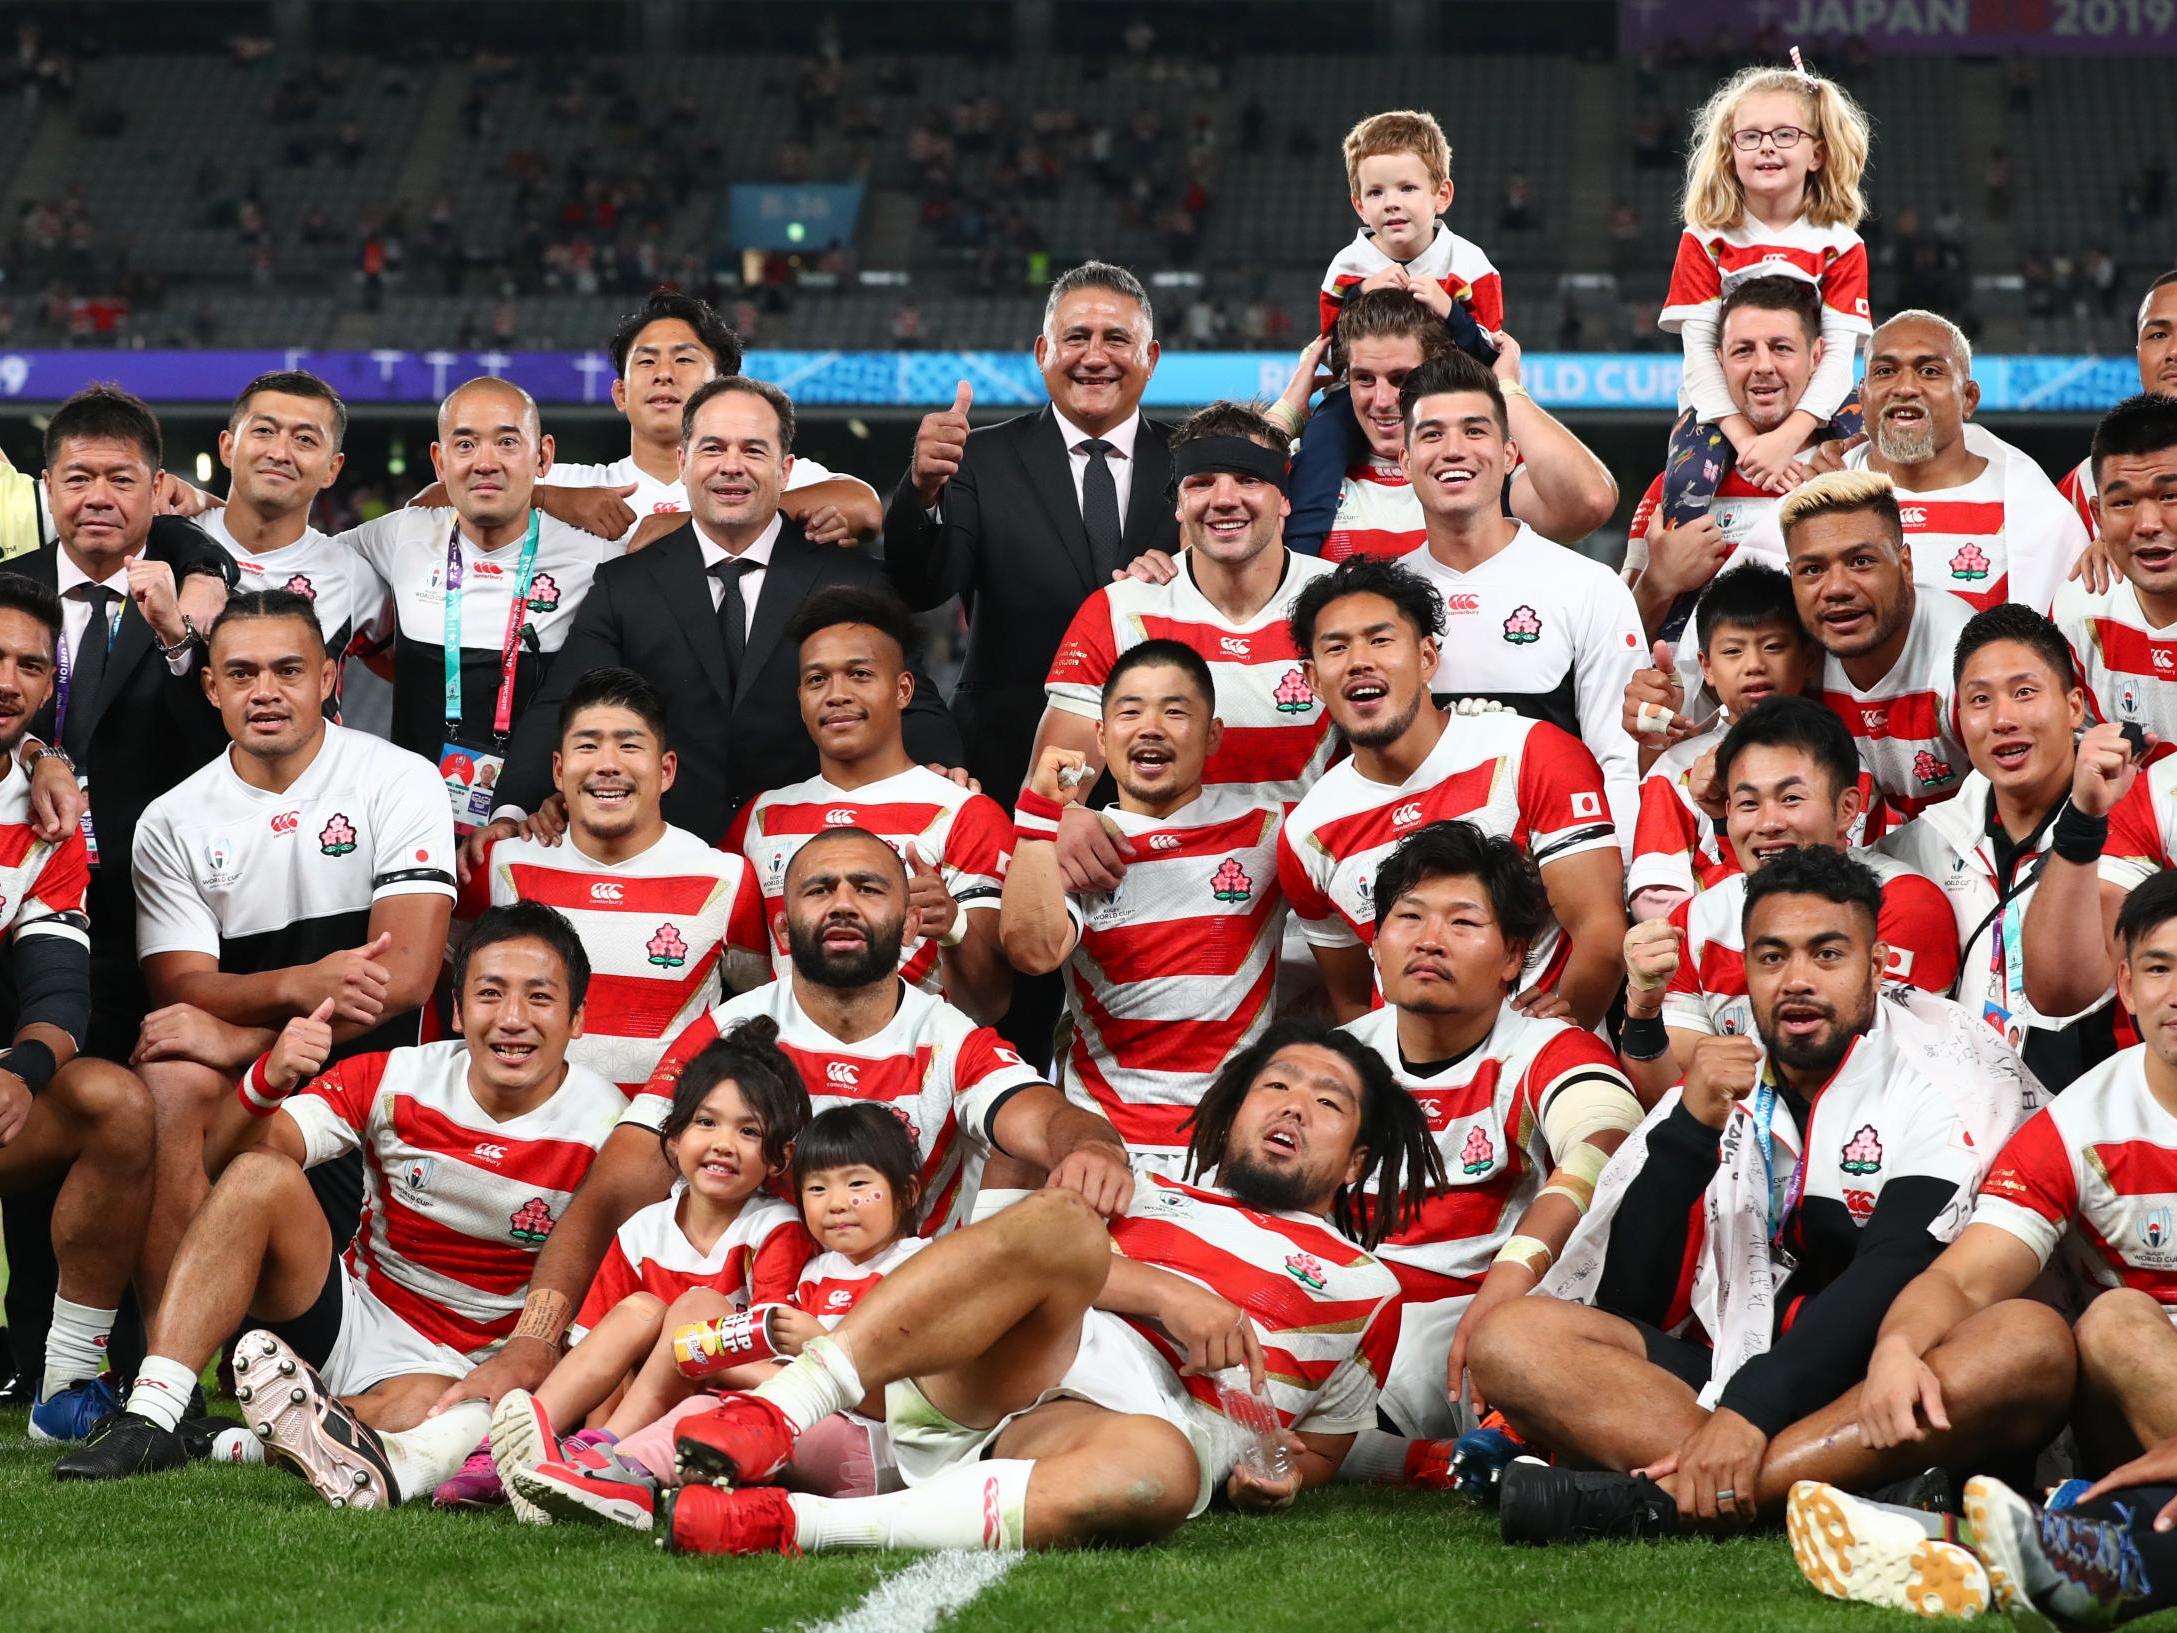 Japan reached the Rugby World Cup quarter-finals for the first time in 2019